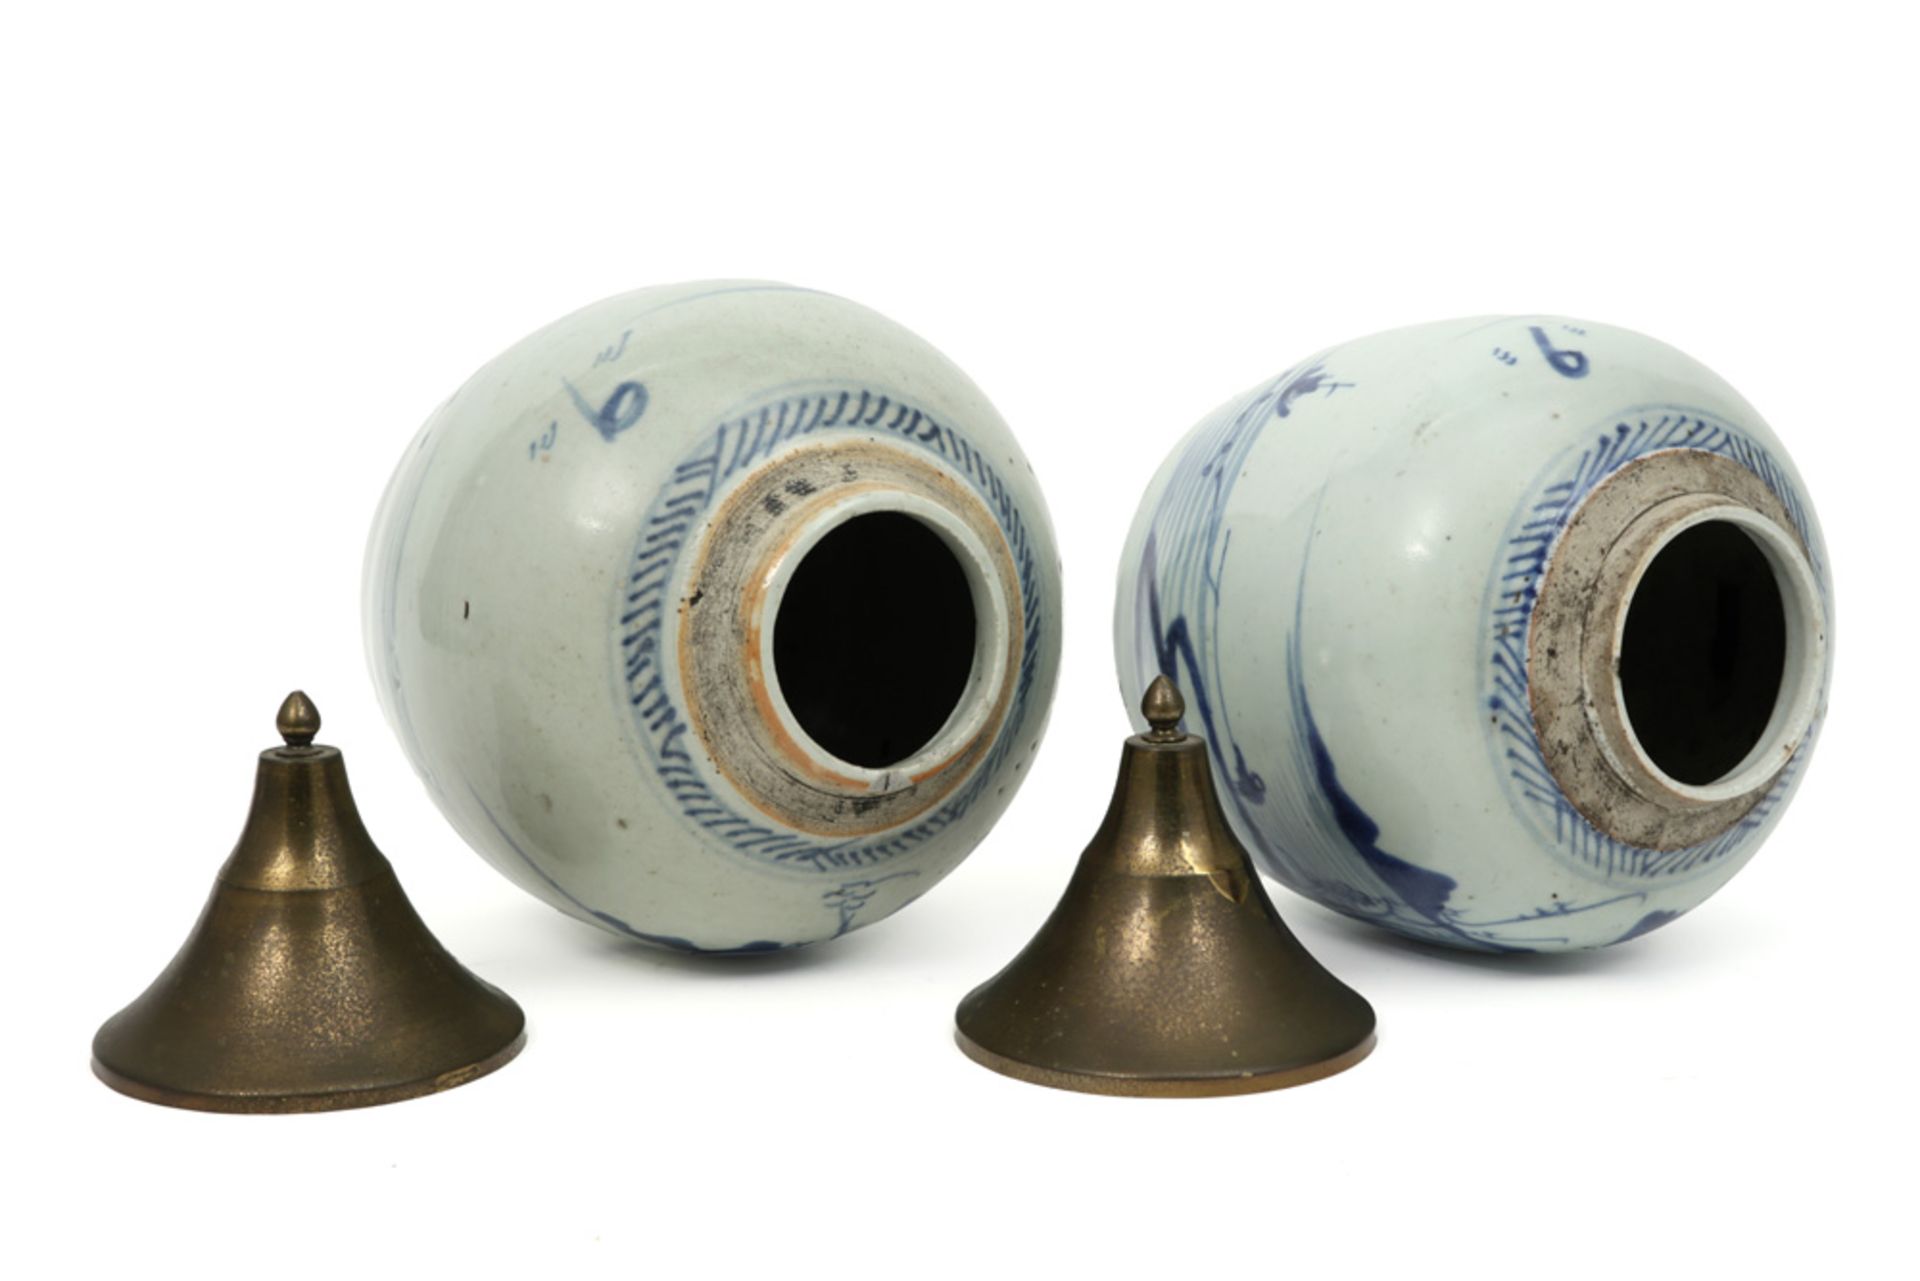 pair of antique Chinese jars in porcelain with a blue-white decor - each with an antique brass lid - Image 3 of 4